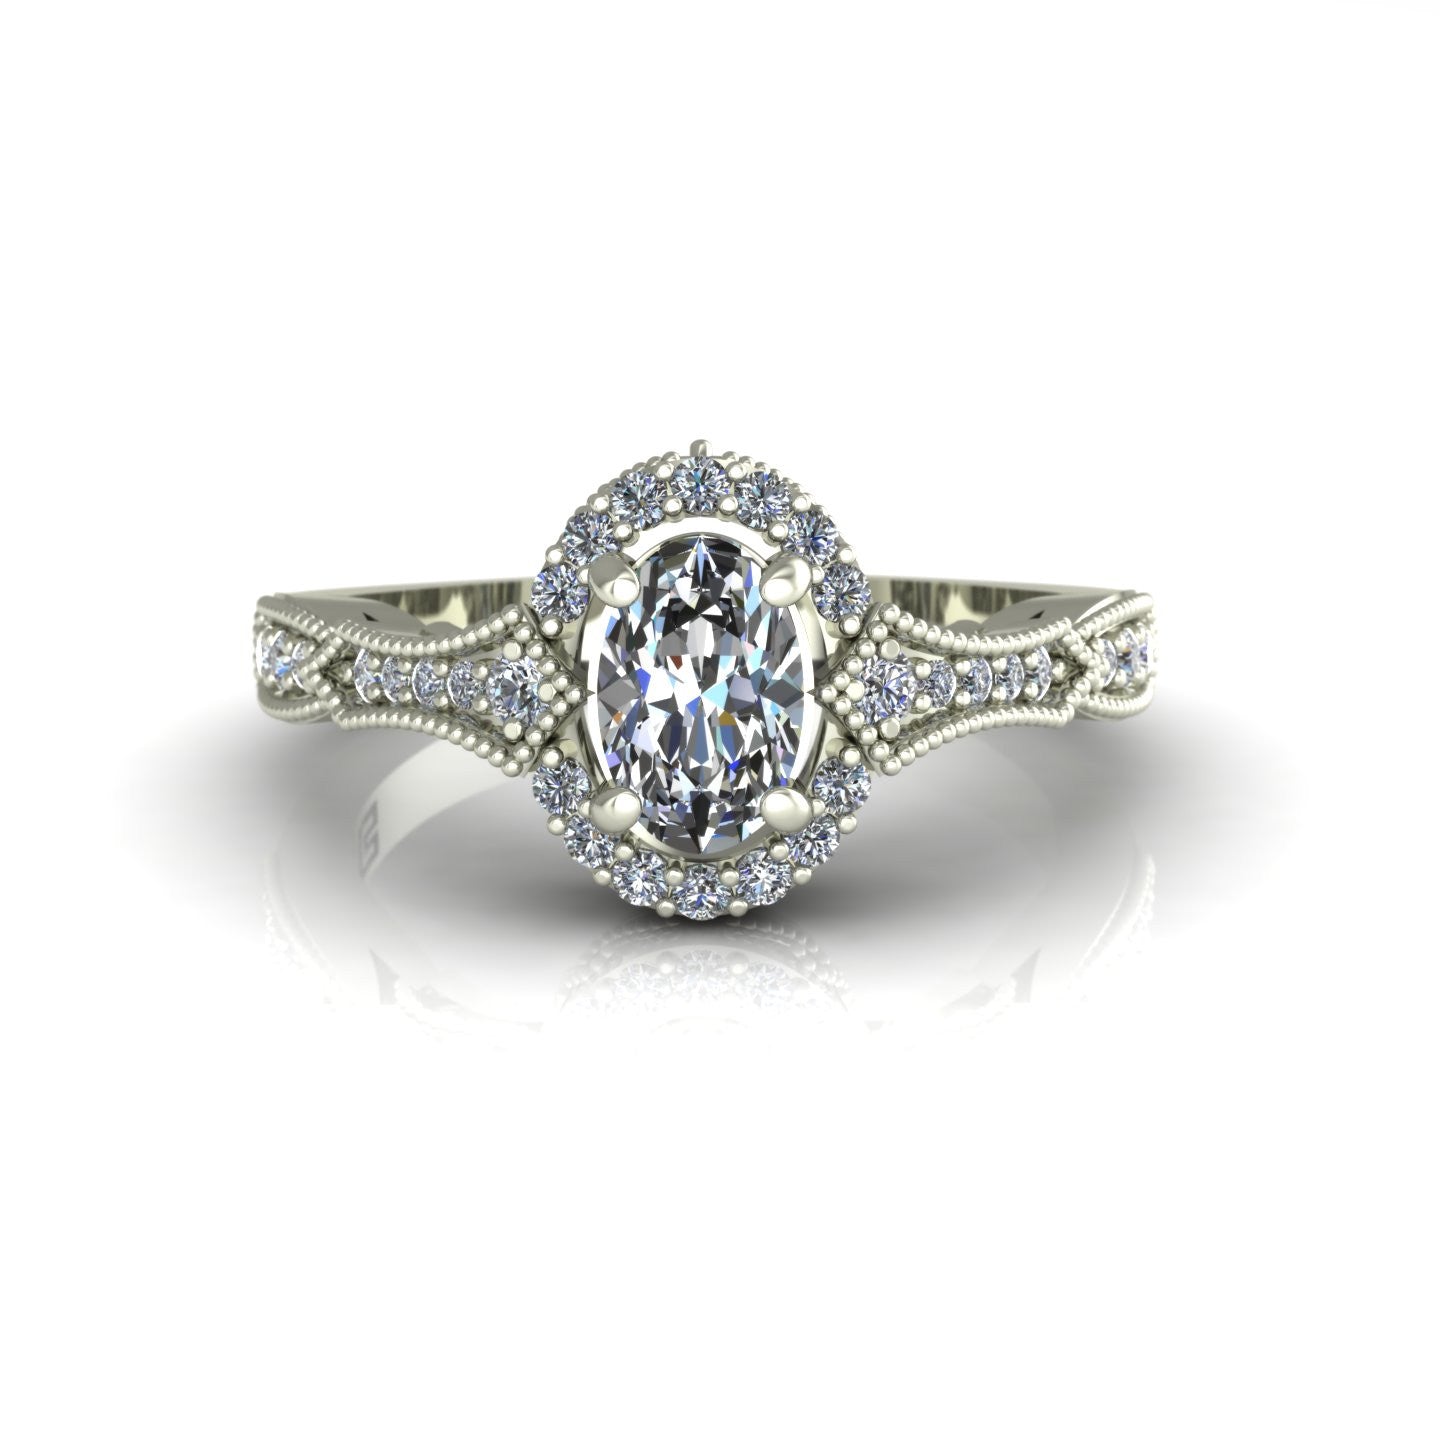 three quarter oval diamond vintage style engagement ring in 14k white gold - Charles Babb Designs - top view